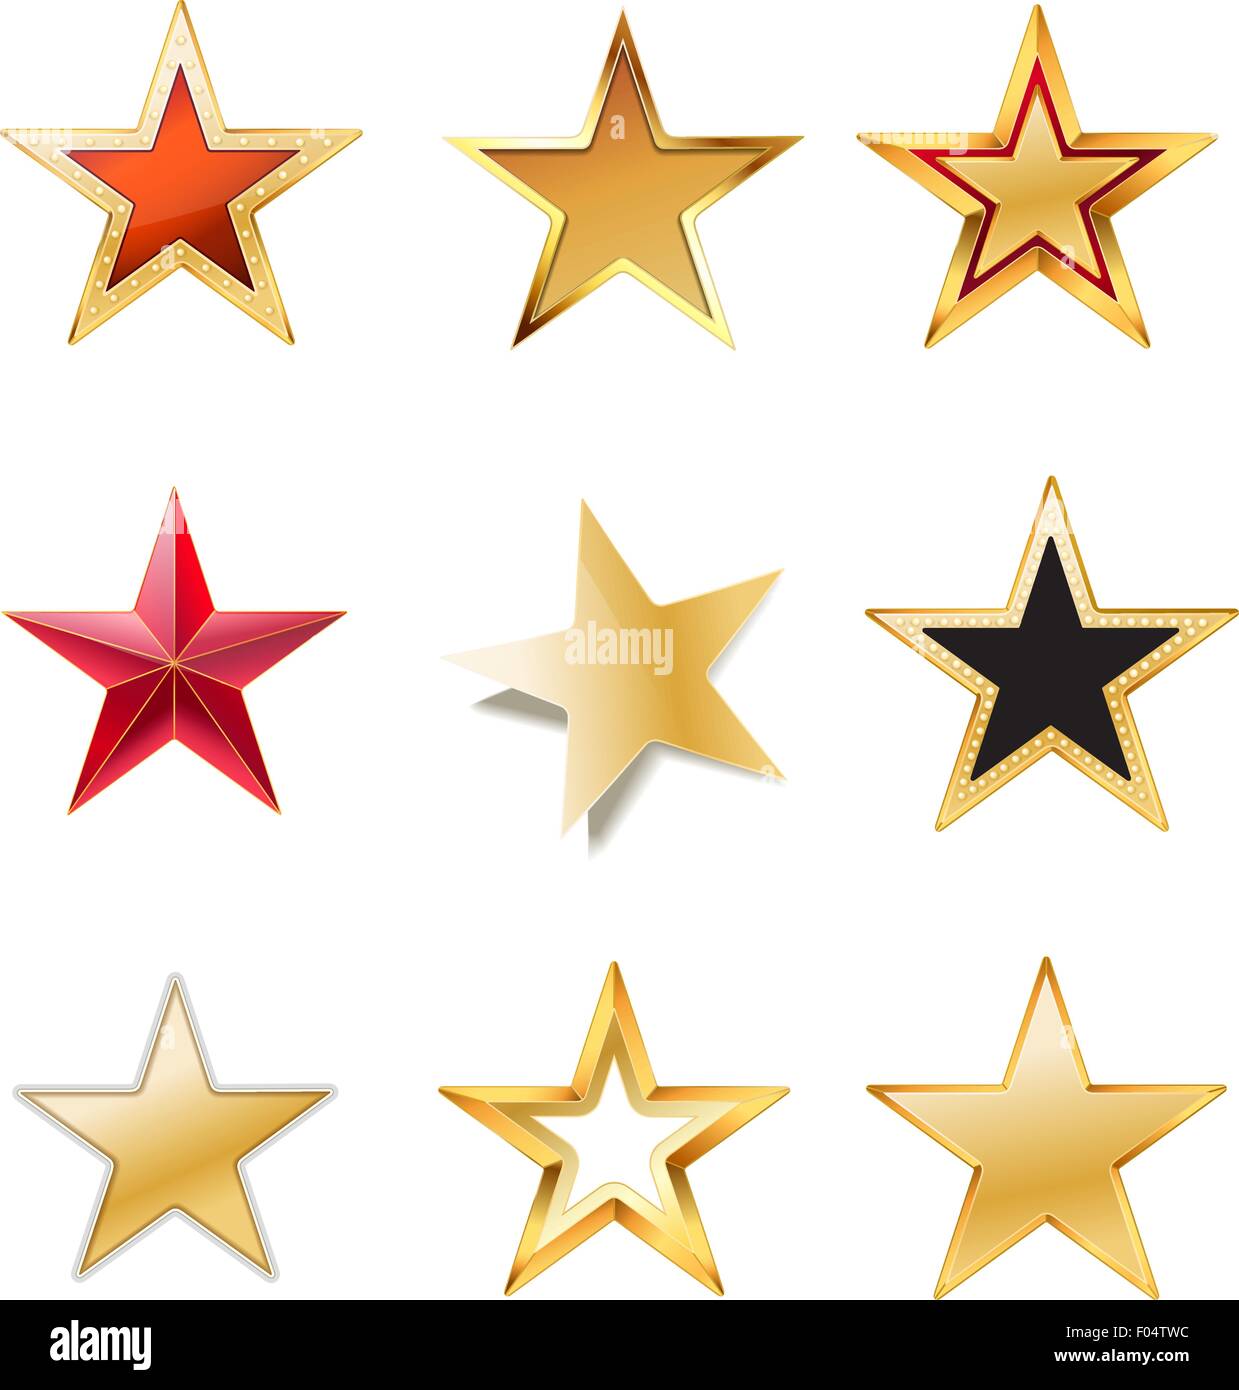 set of stars with gold, red, black colors Stock Vector